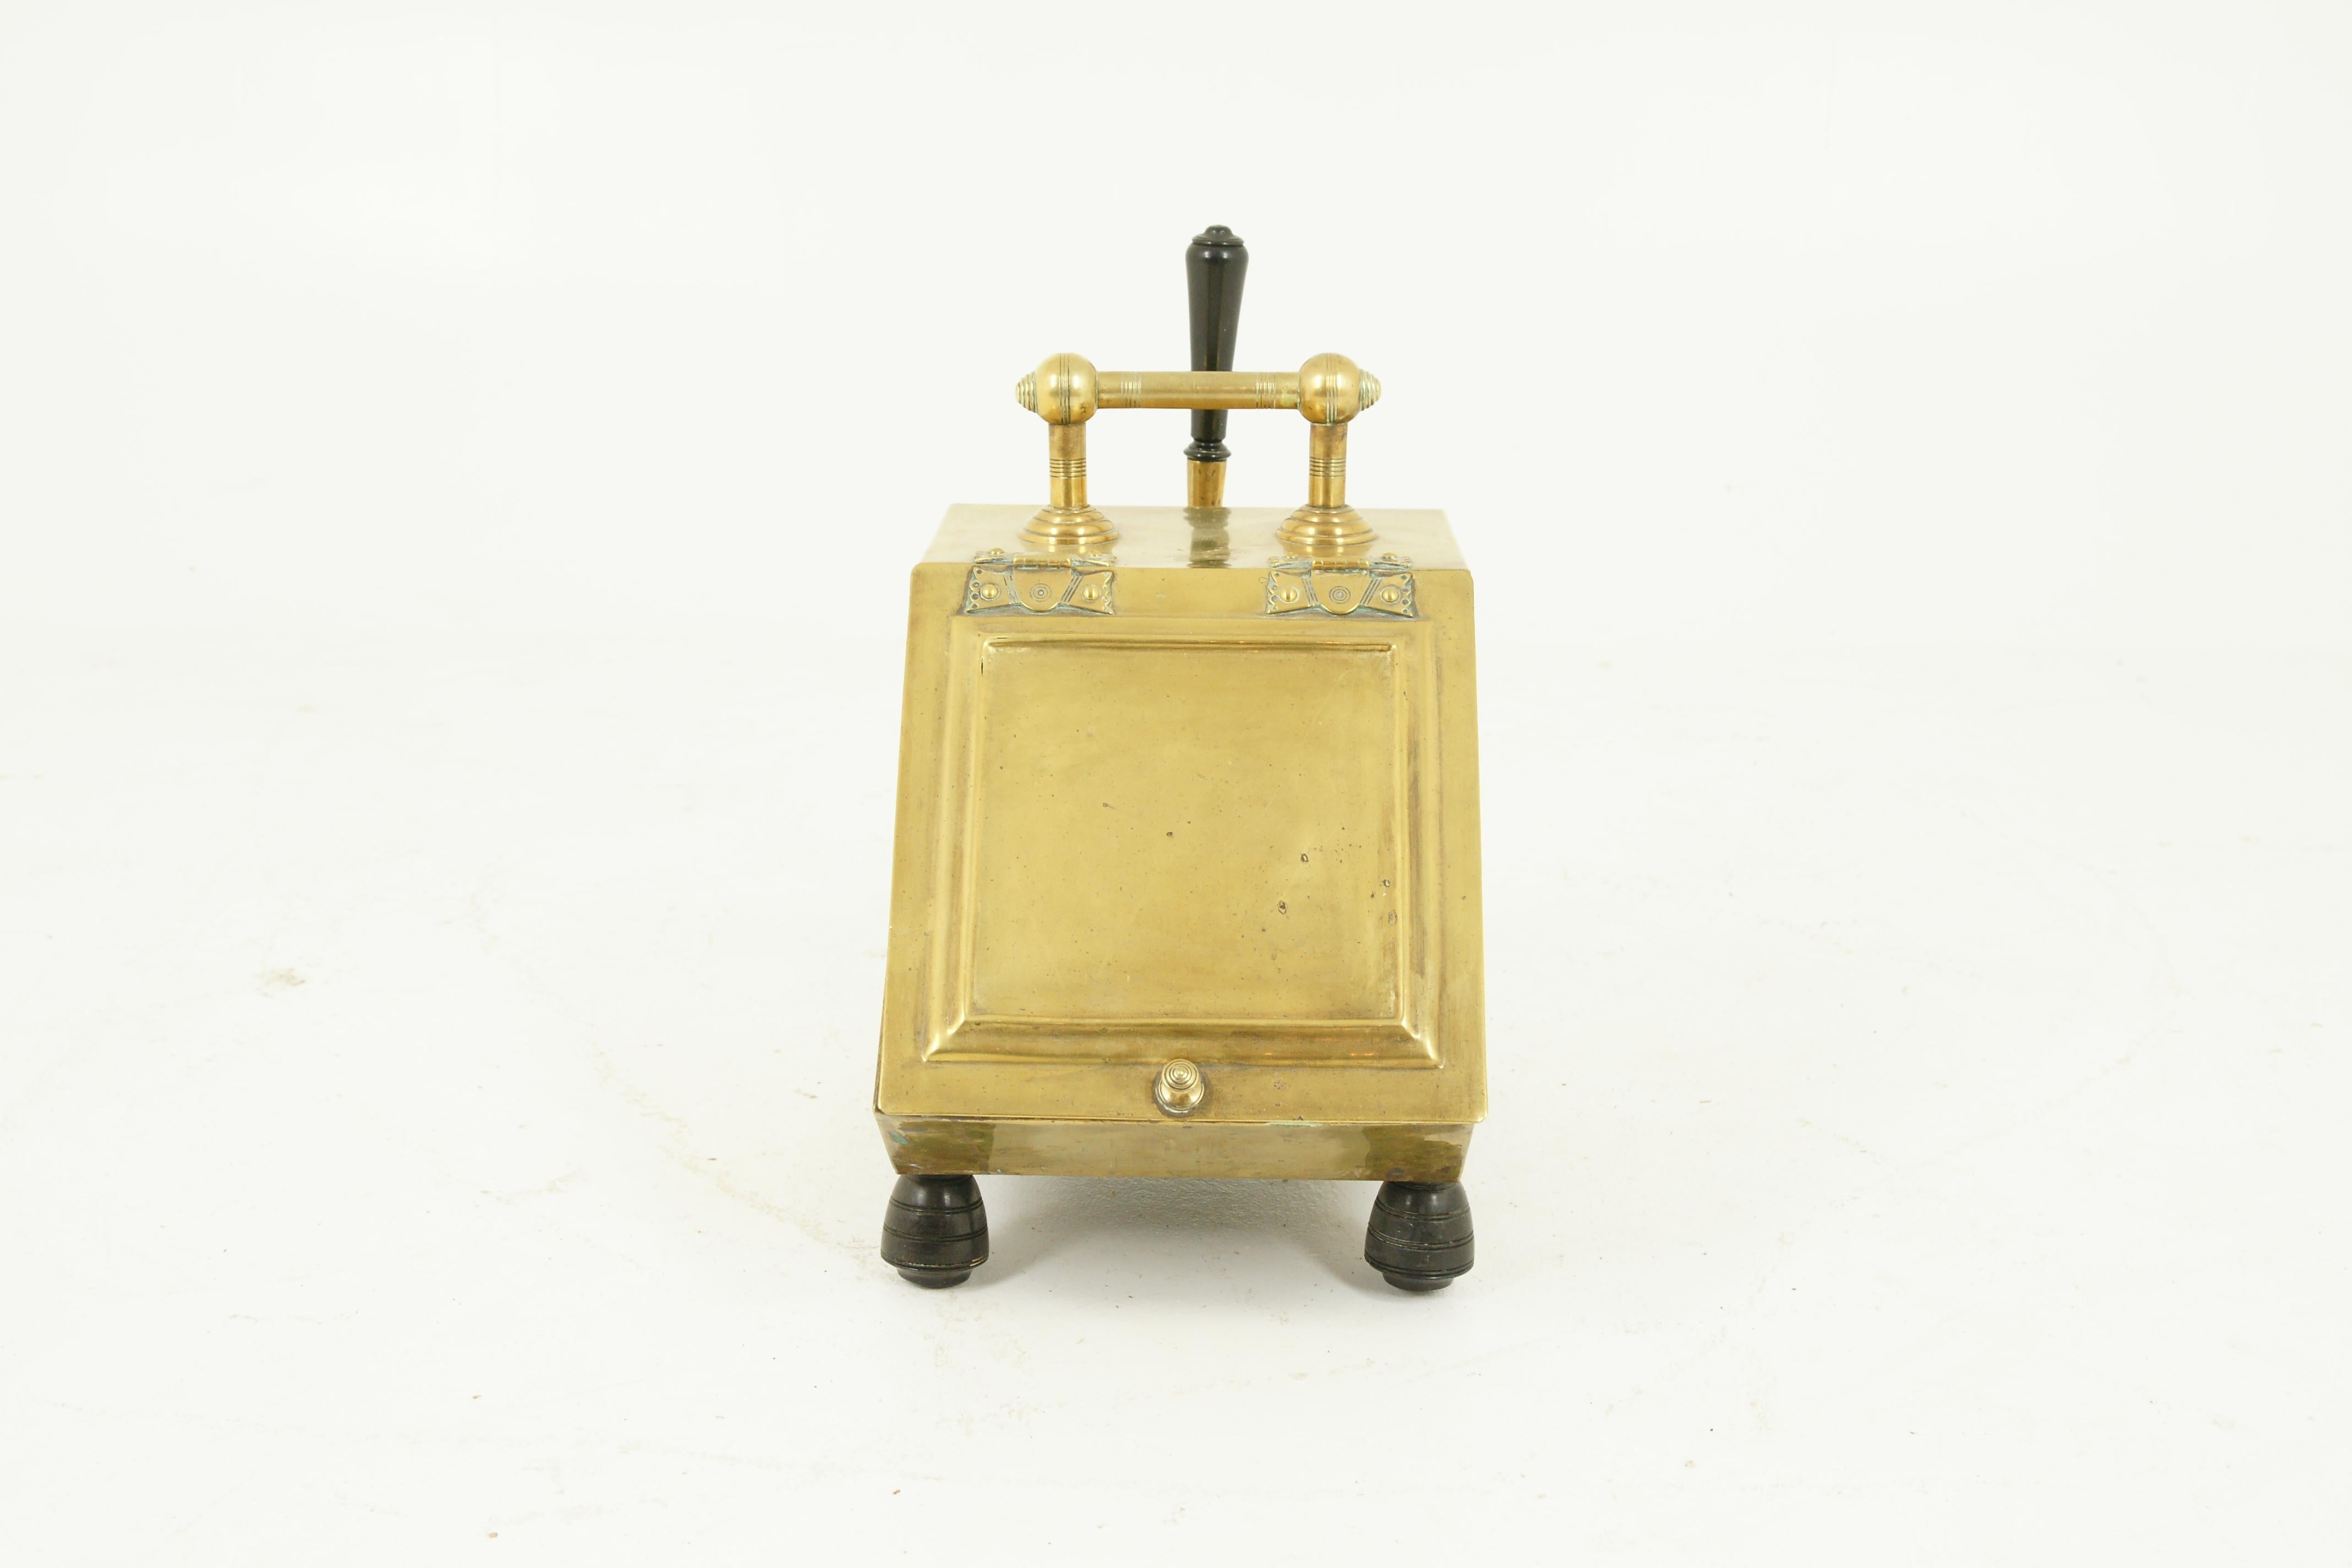 Antique coal hod, coal box, brass coal box, Scotland 1880, H048

Solid brass in original condition
Brass handle on top
Shovel sitting at the back
Slanted lift up front
Original metal lift out coal liner
Ending on four ebonized turned